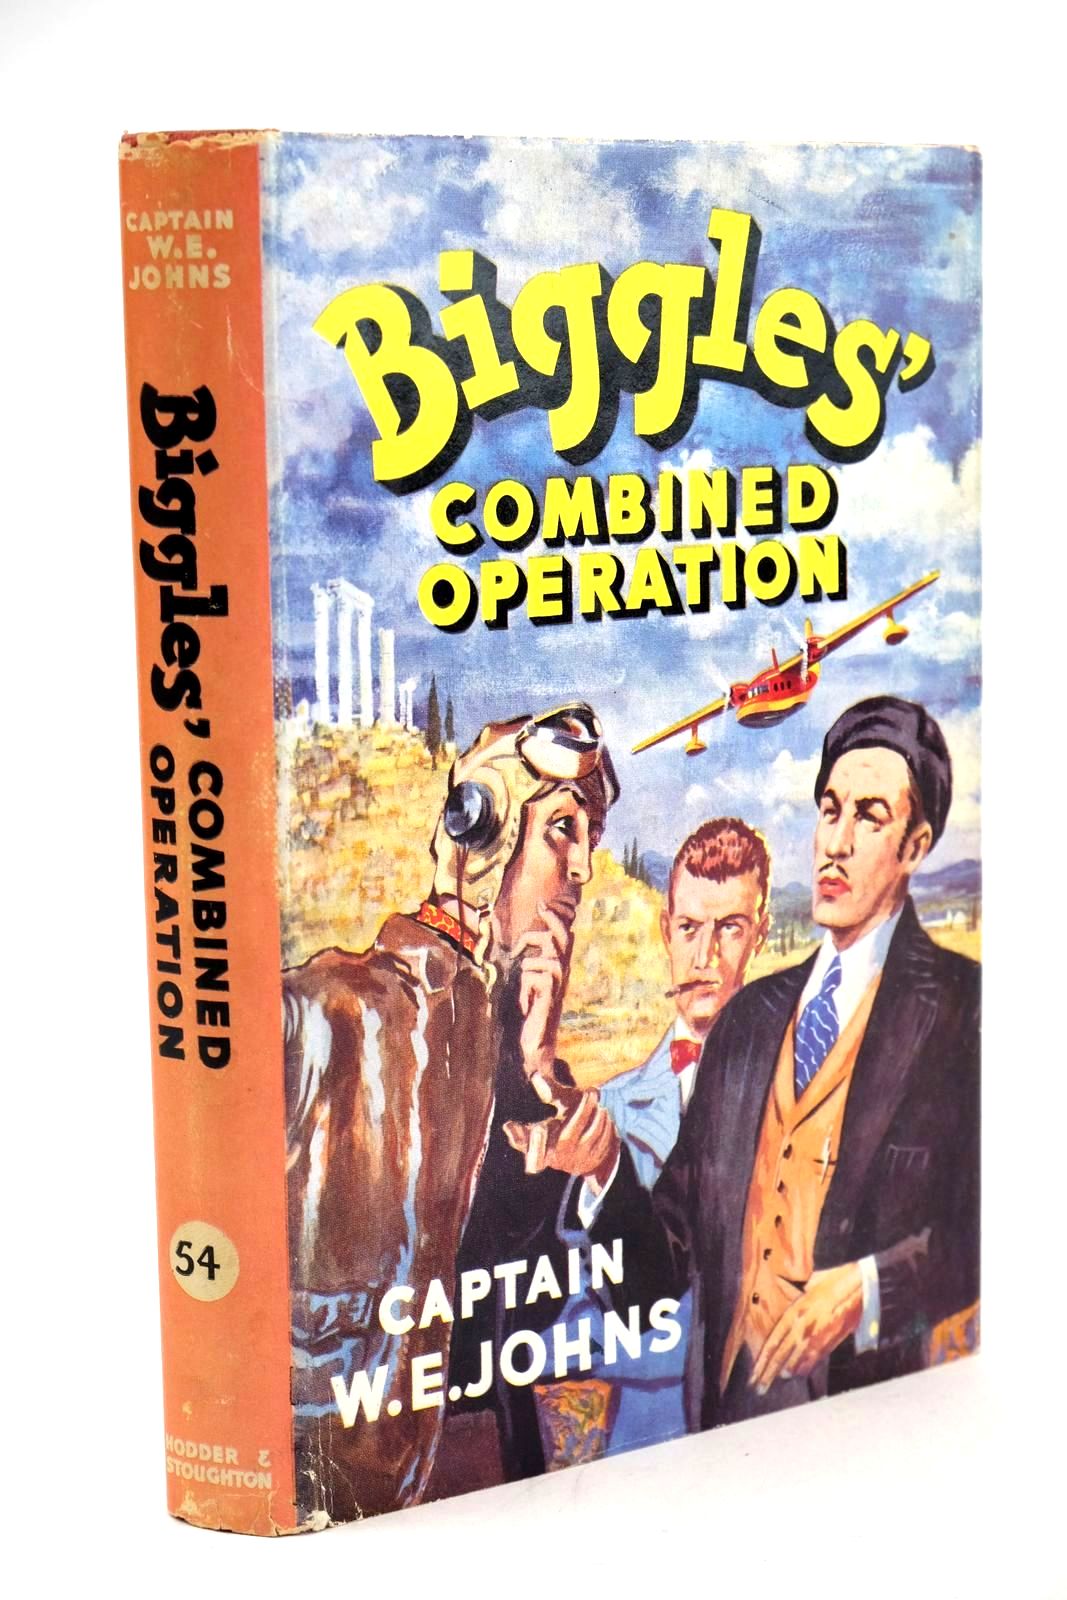 Photo of BIGGLES' COMBINED OPERATION written by Johns, W.E. illustrated by Stead,  published by Hodder & Stoughton (STOCK CODE: 1324359)  for sale by Stella & Rose's Books